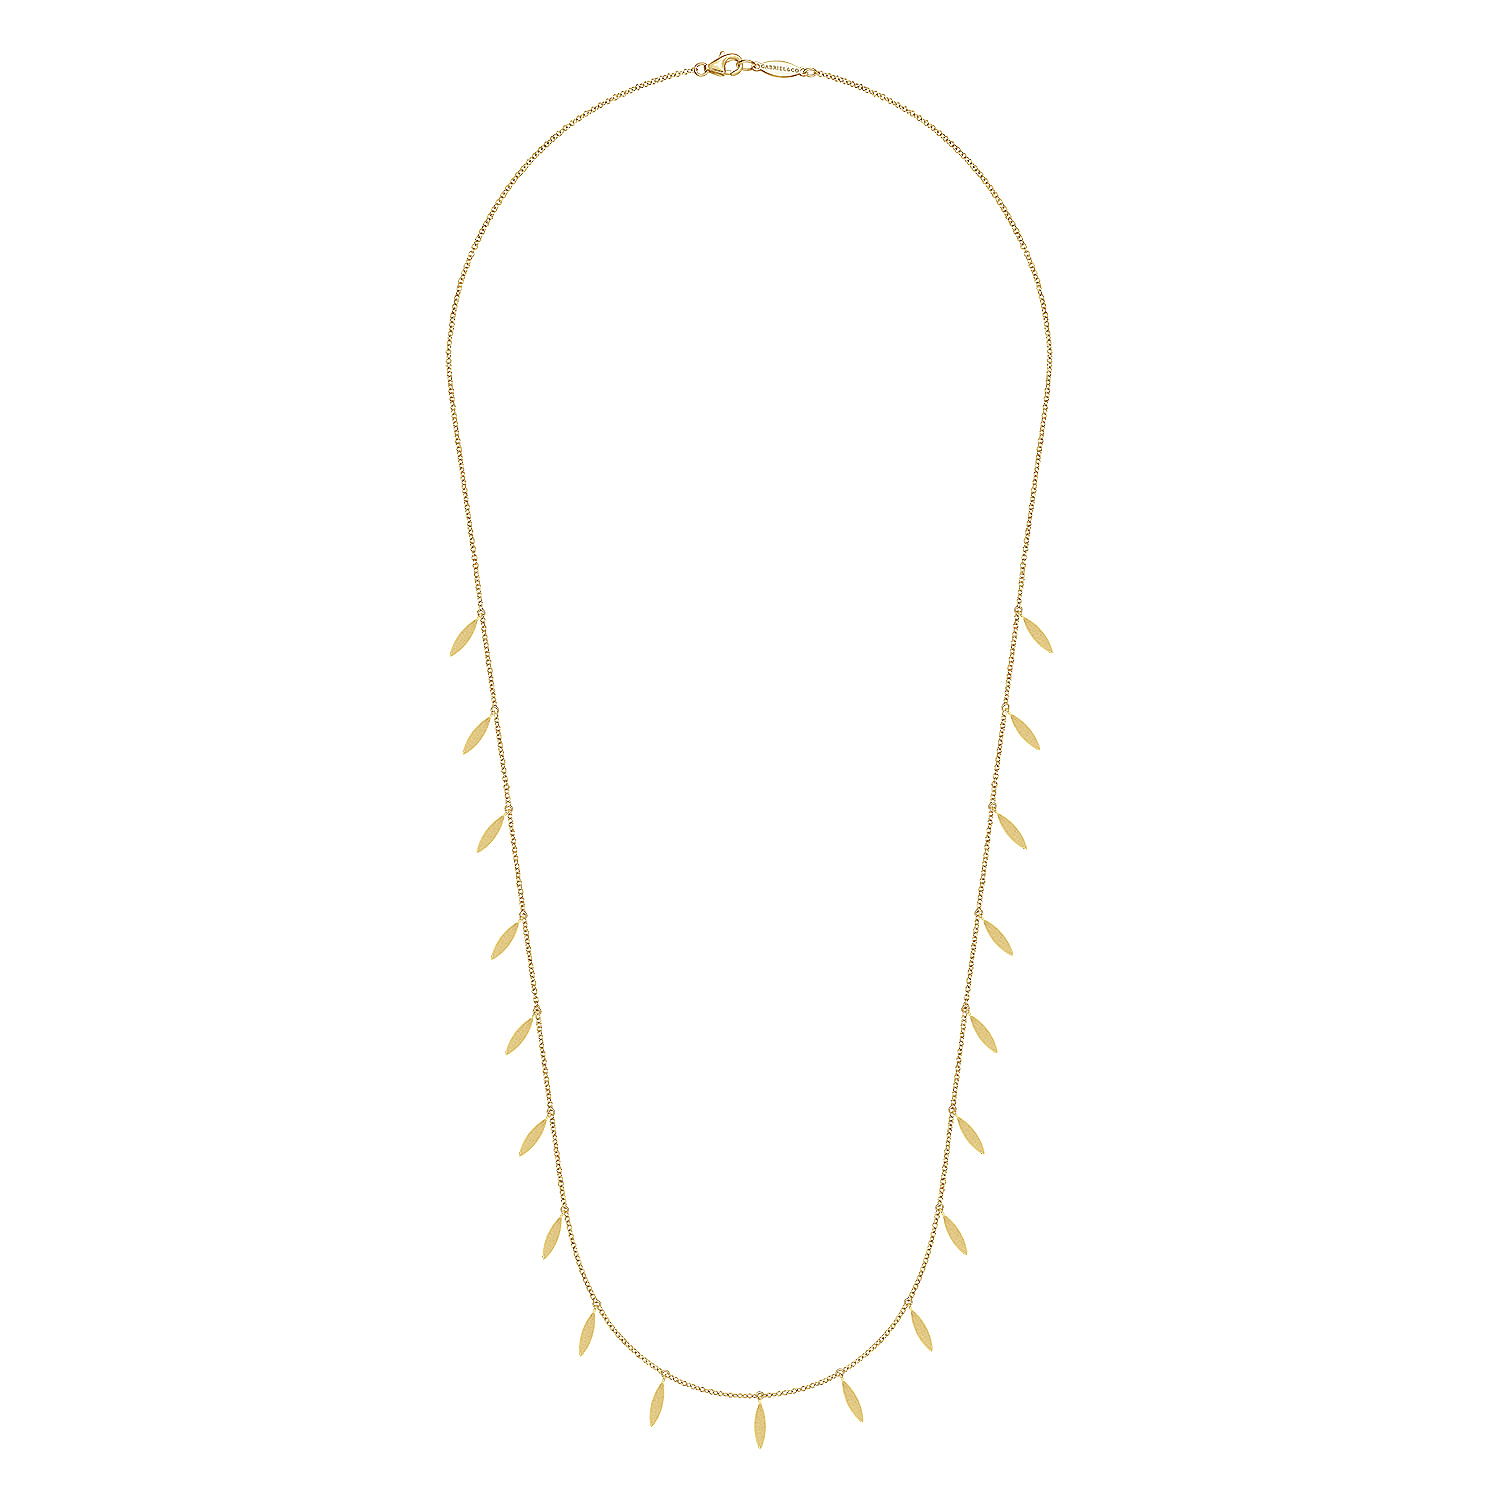 24 inch 14K Yellow Gold Chain Necklace with Marquise Shaped Drops - Shot 2